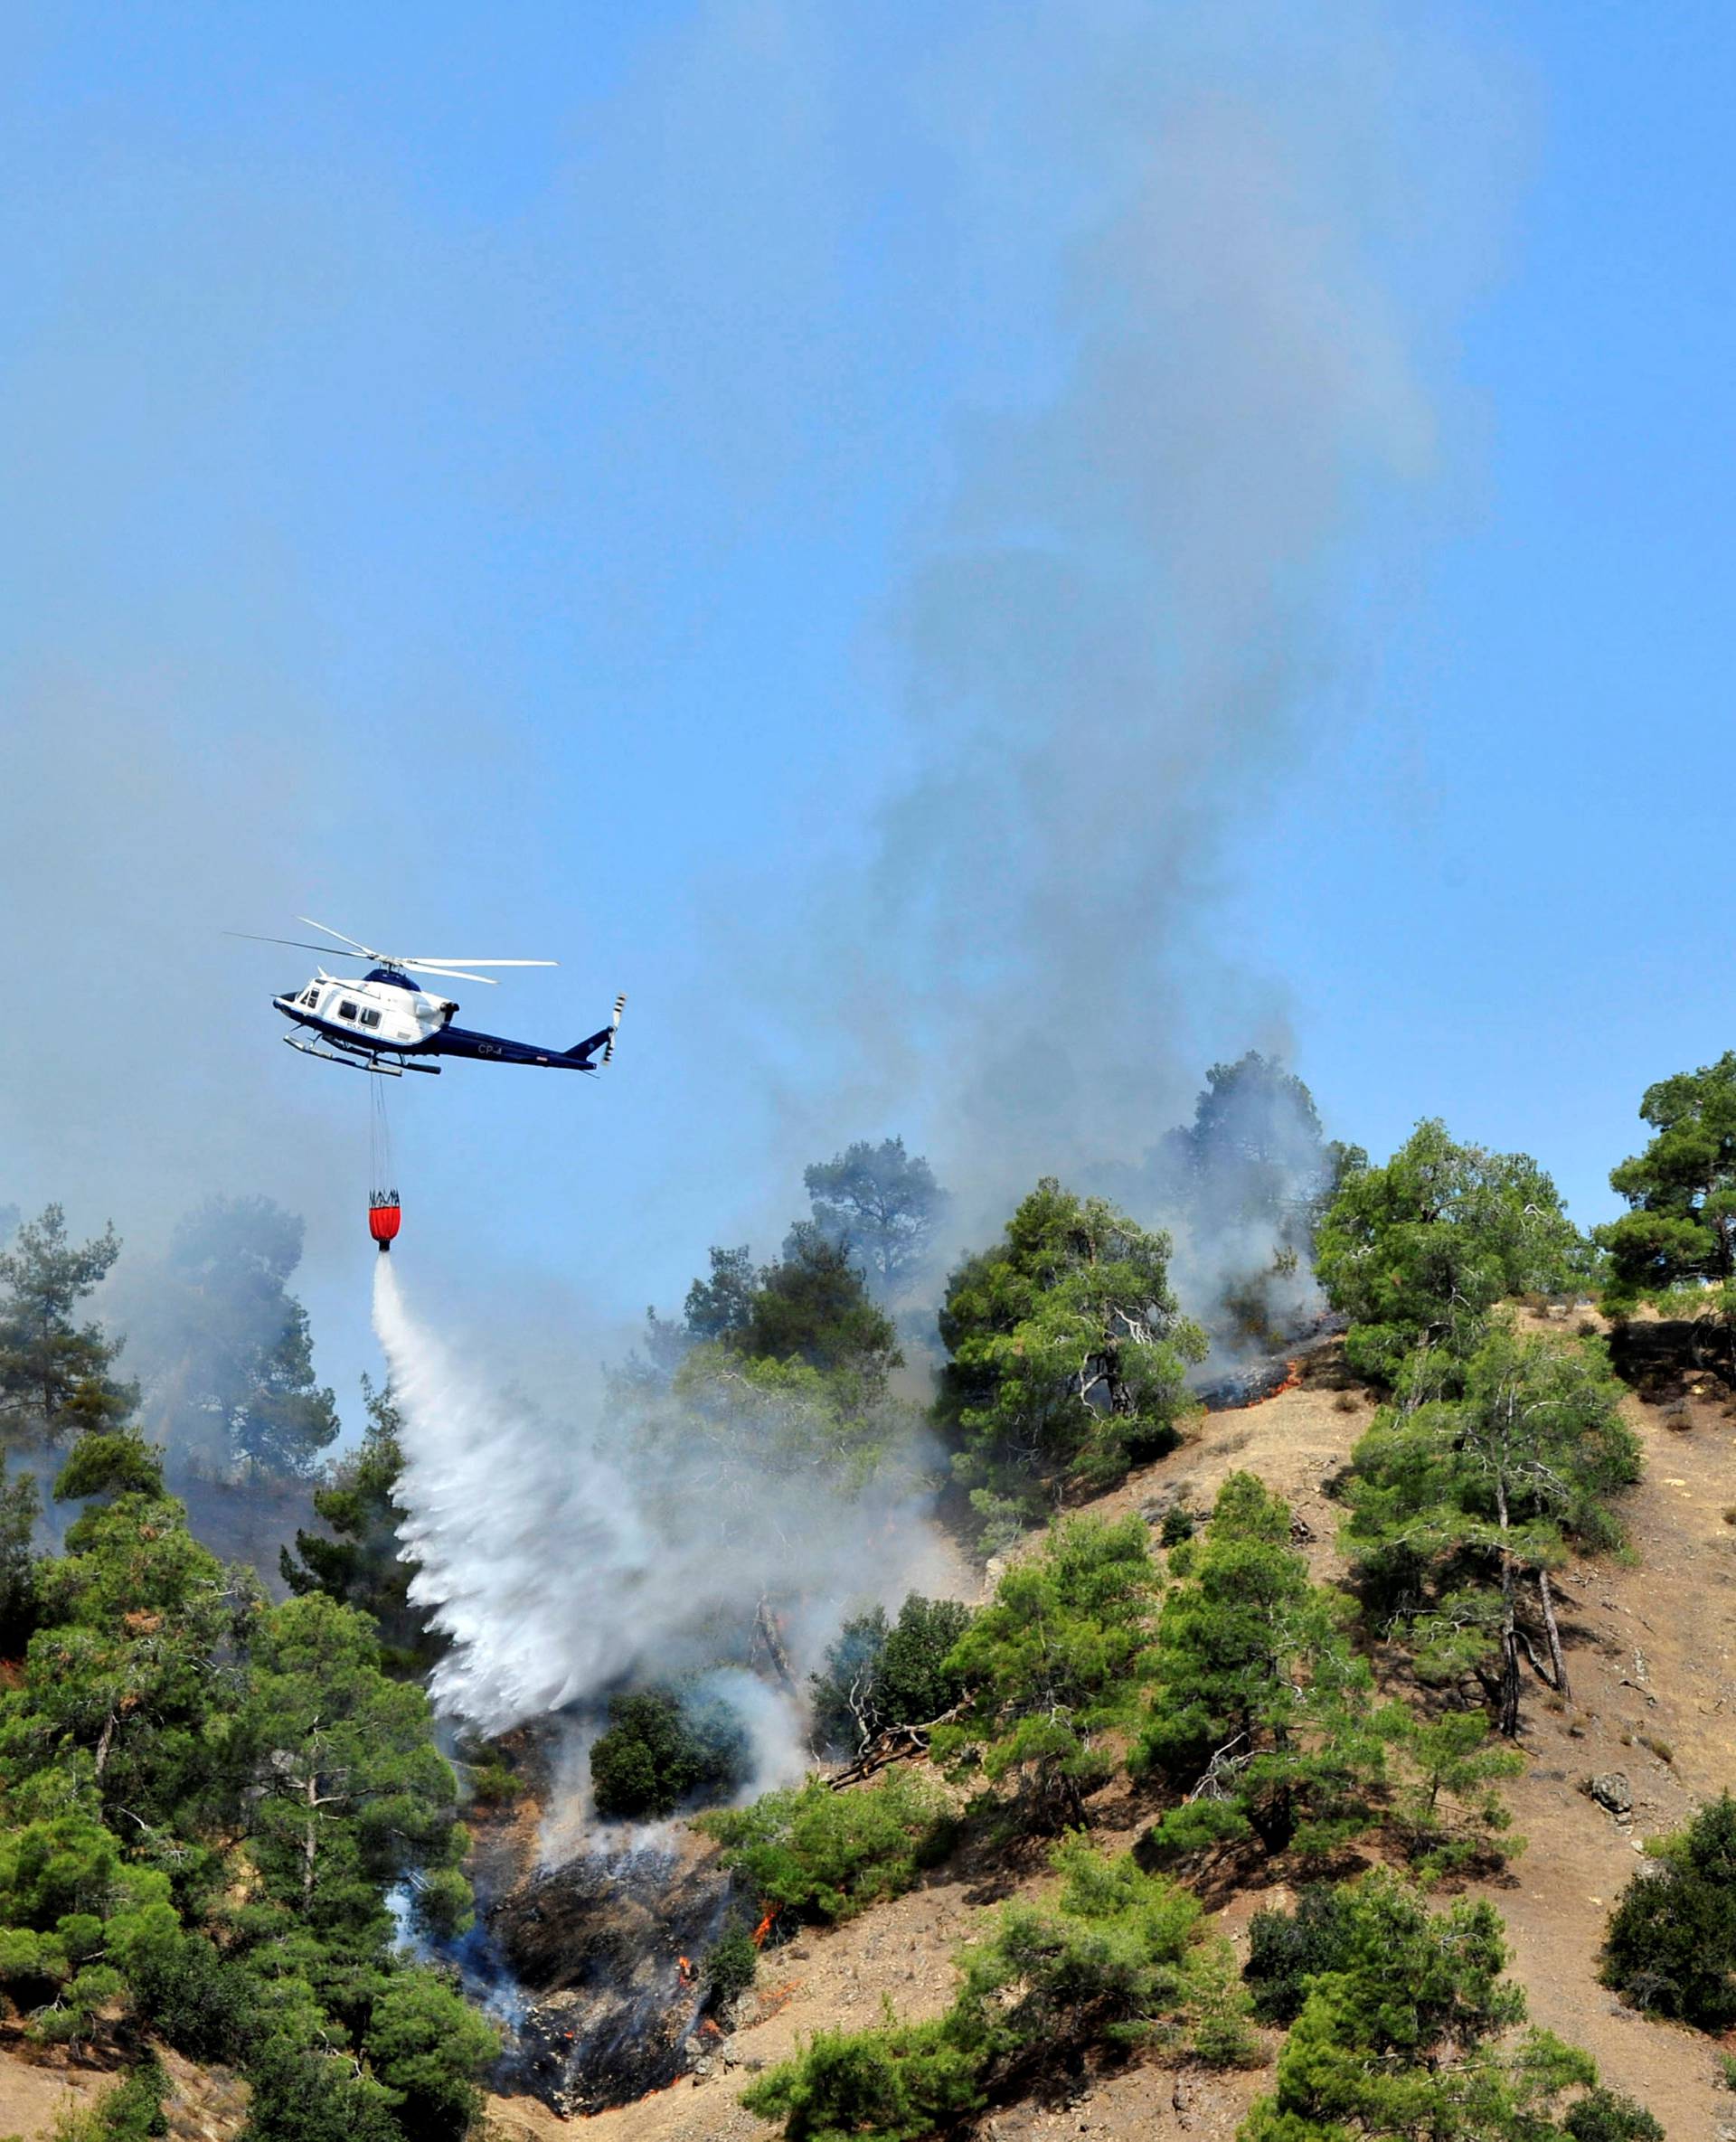 A firefighting helicopter drops water onto a forest fire at the foothills of Troodos mountain region in Cyprus